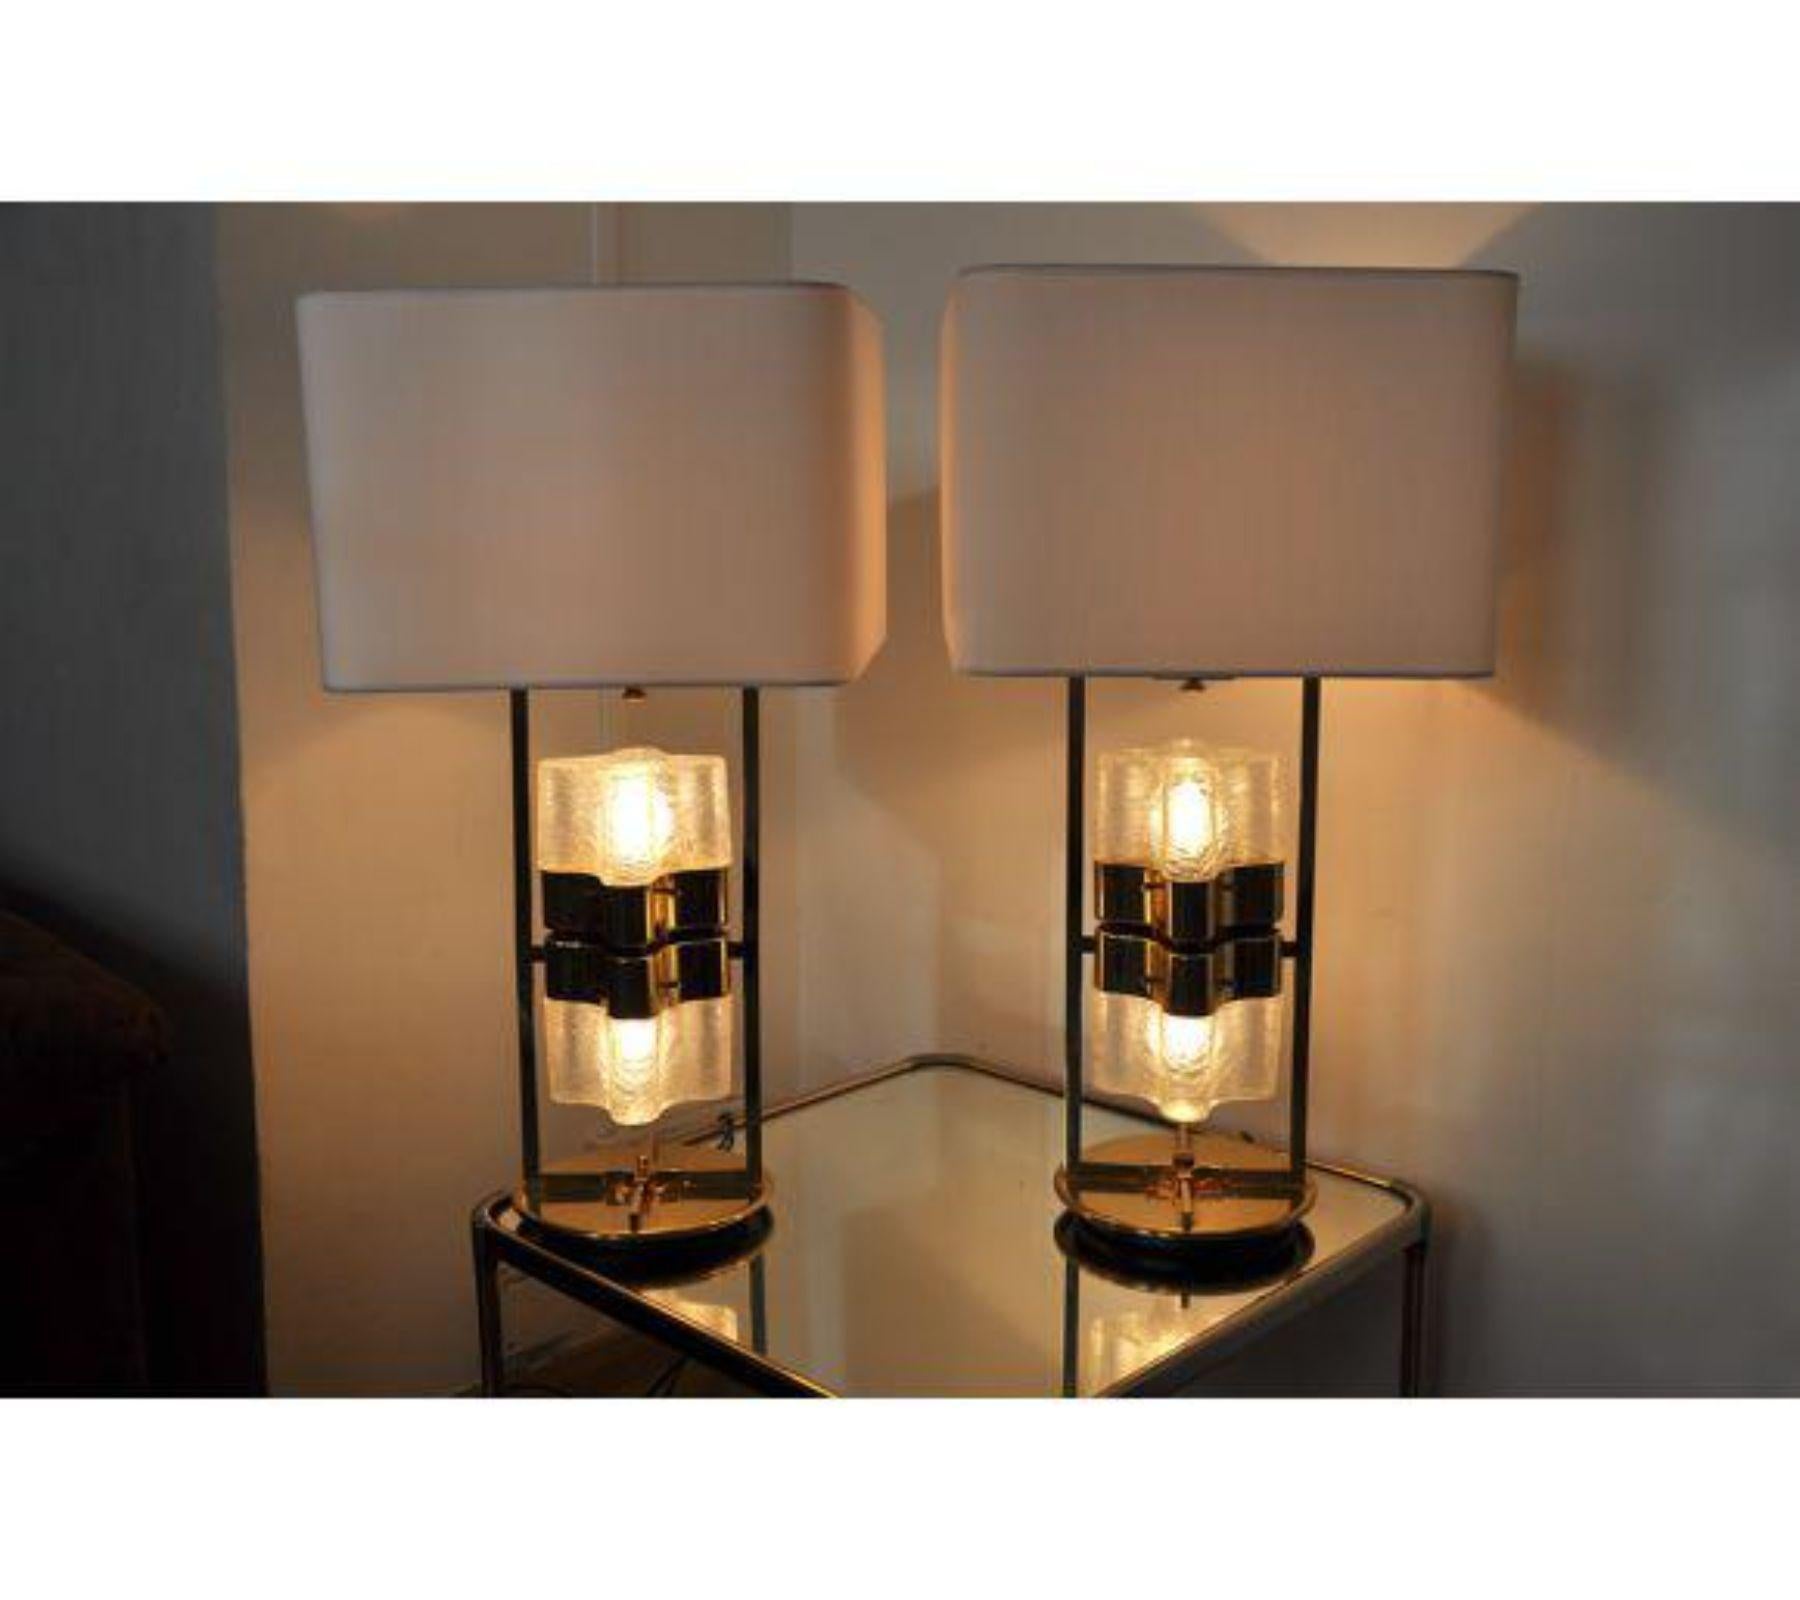 Rare Pair of table lamp designed by Gaetano Sciolari and produced in Italy, circa 1970. Gold plated metallic structure Murano frozen crystals effect. A magnificent pair of lamps and unique piece of design that will be great a highlight to your